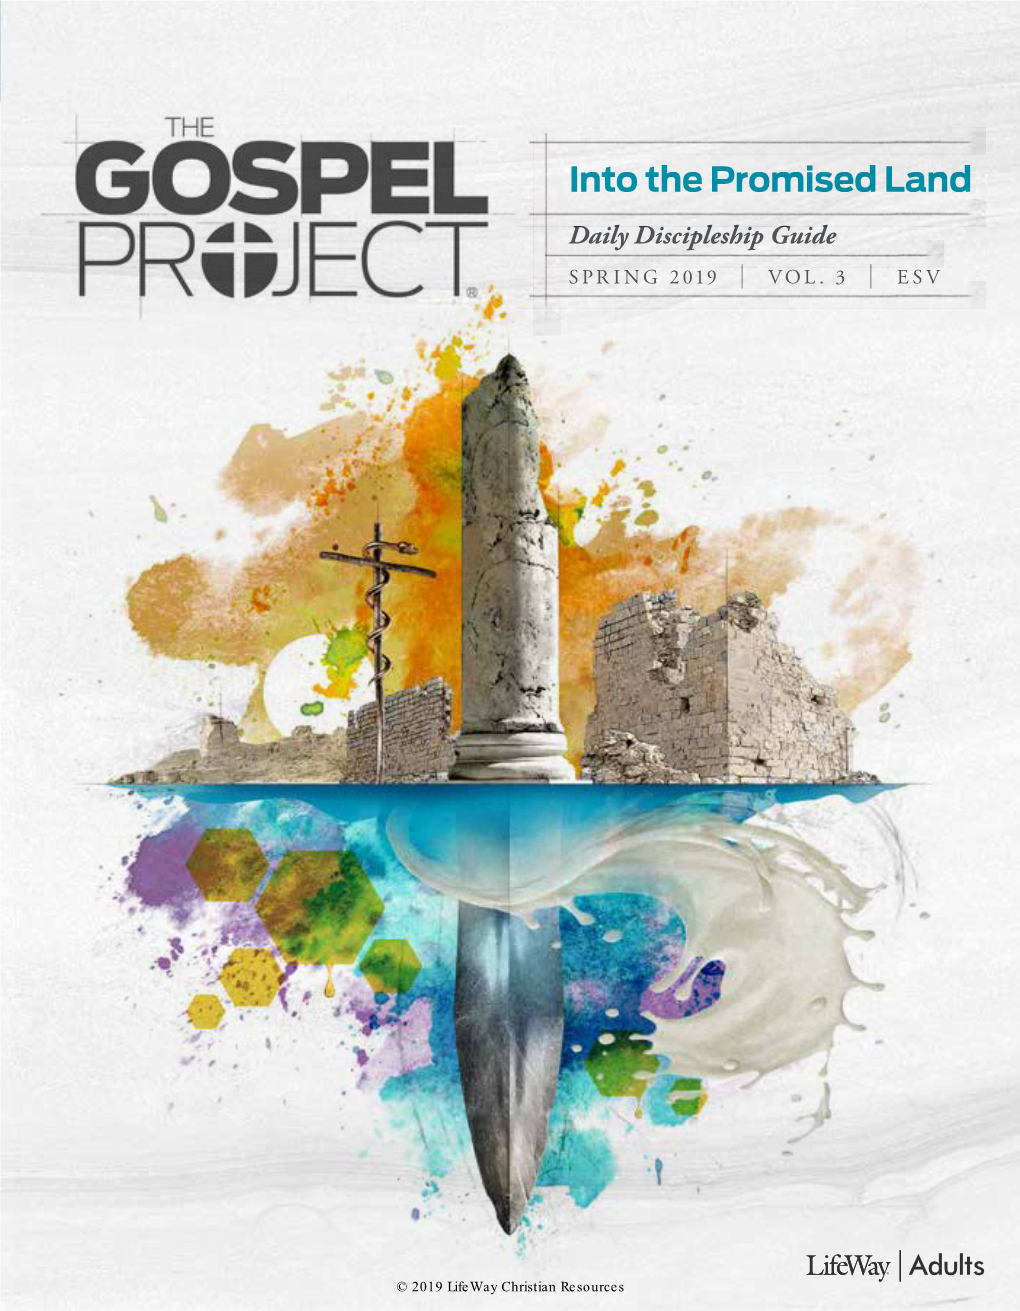 Into the Promised Land Daily Discipleship Guide SPRING 2019 | VOL